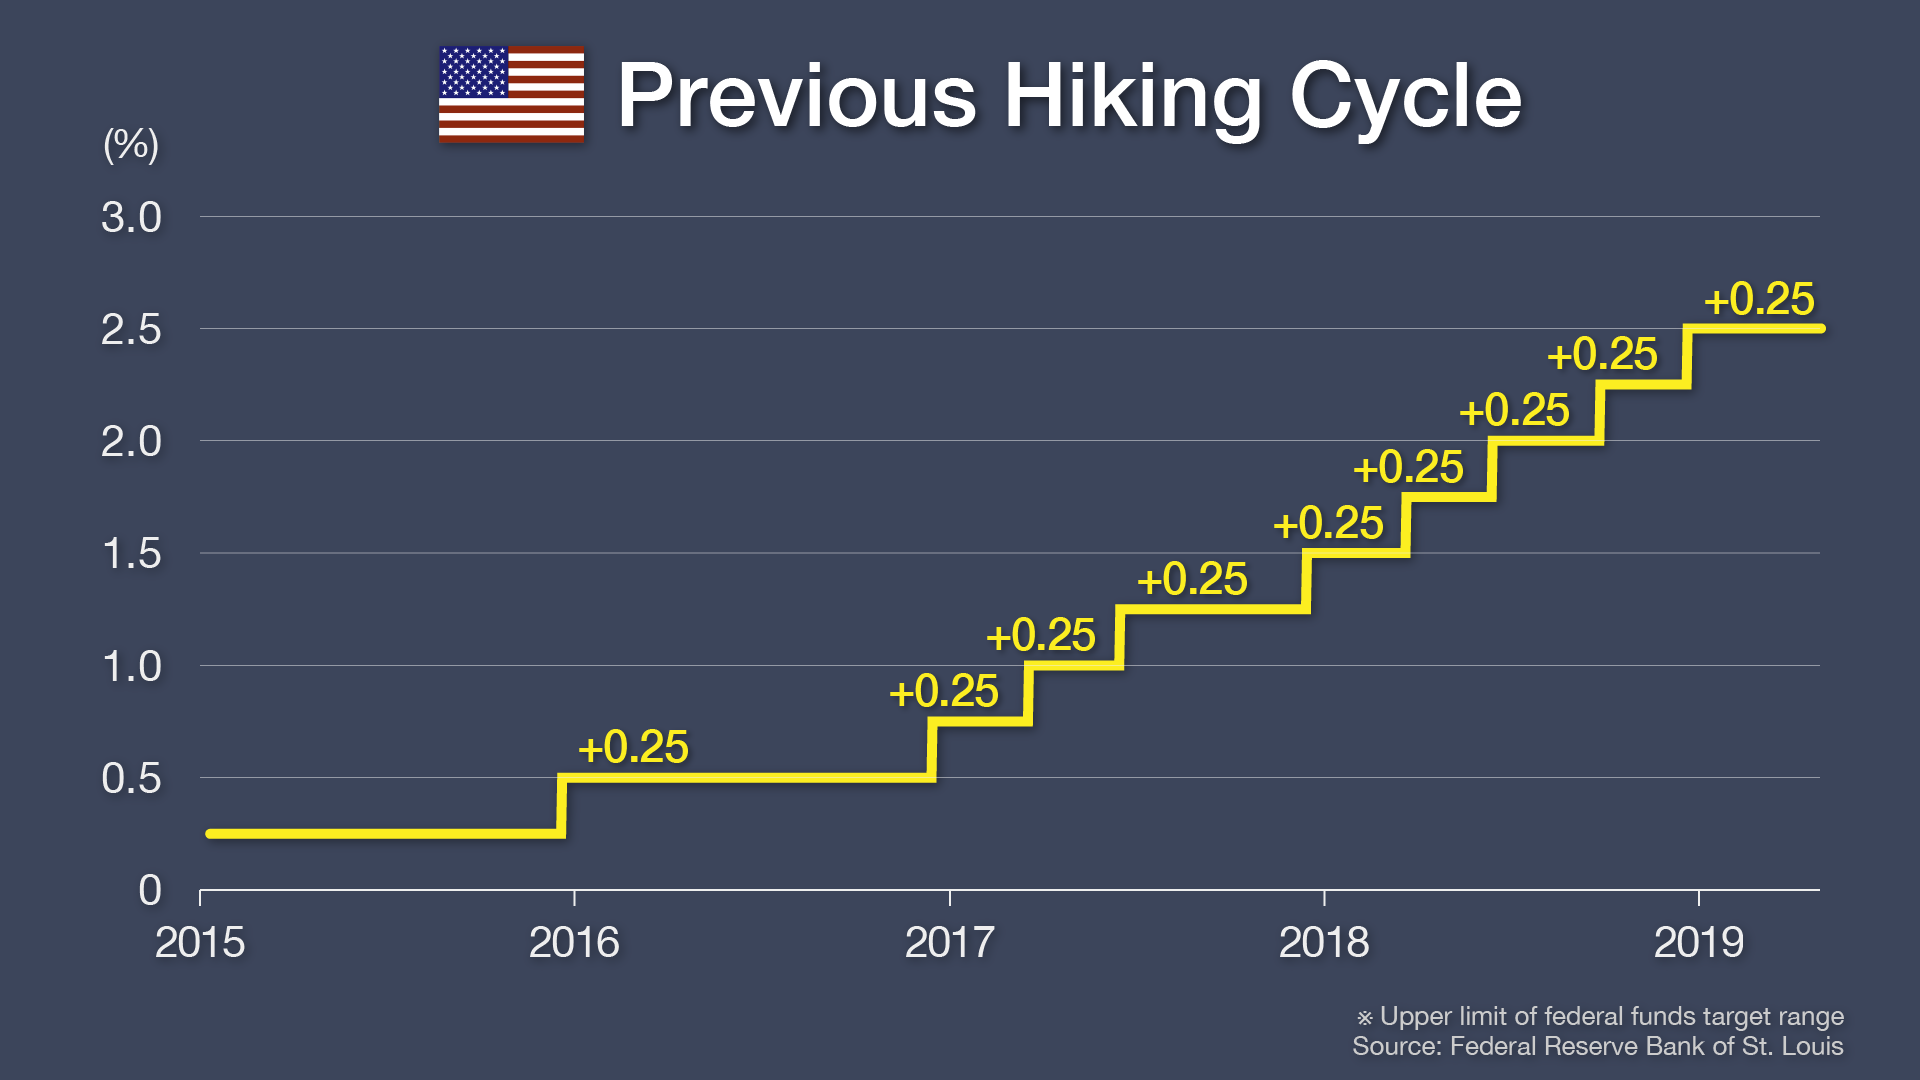 Previous Hiking Cycle